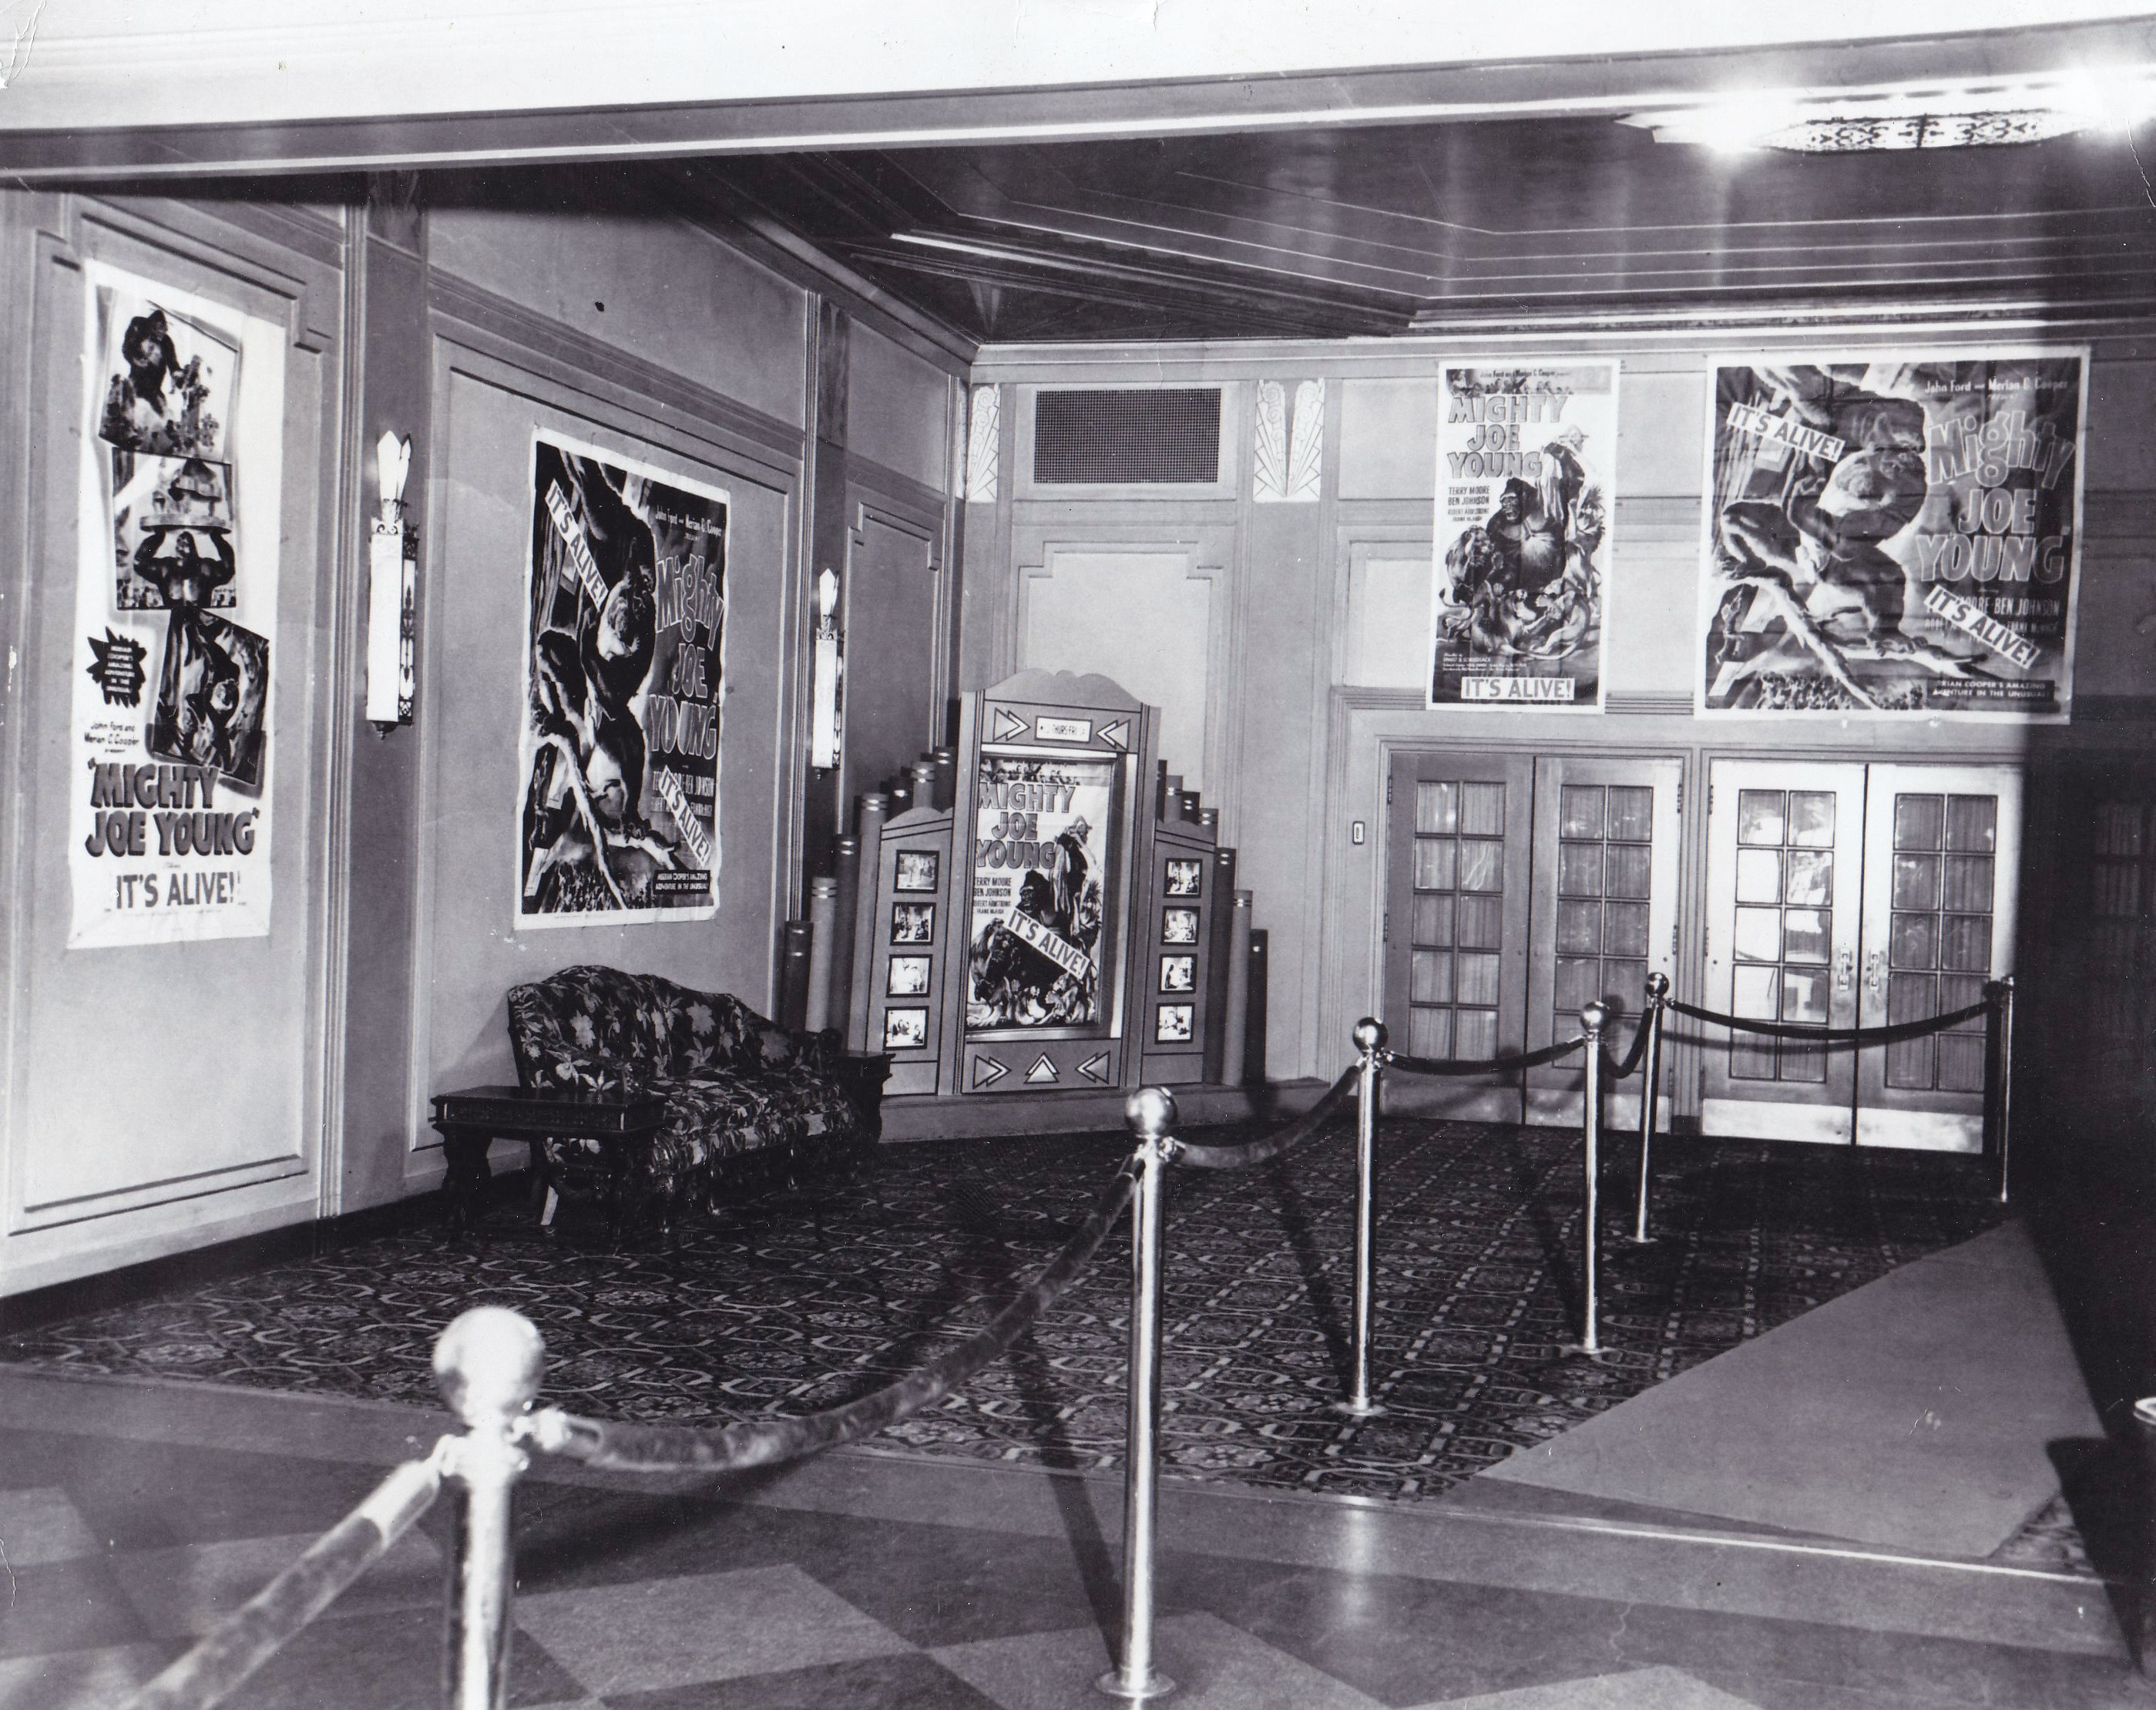 Historic image of the Flynn lobby with movie posters hanging.